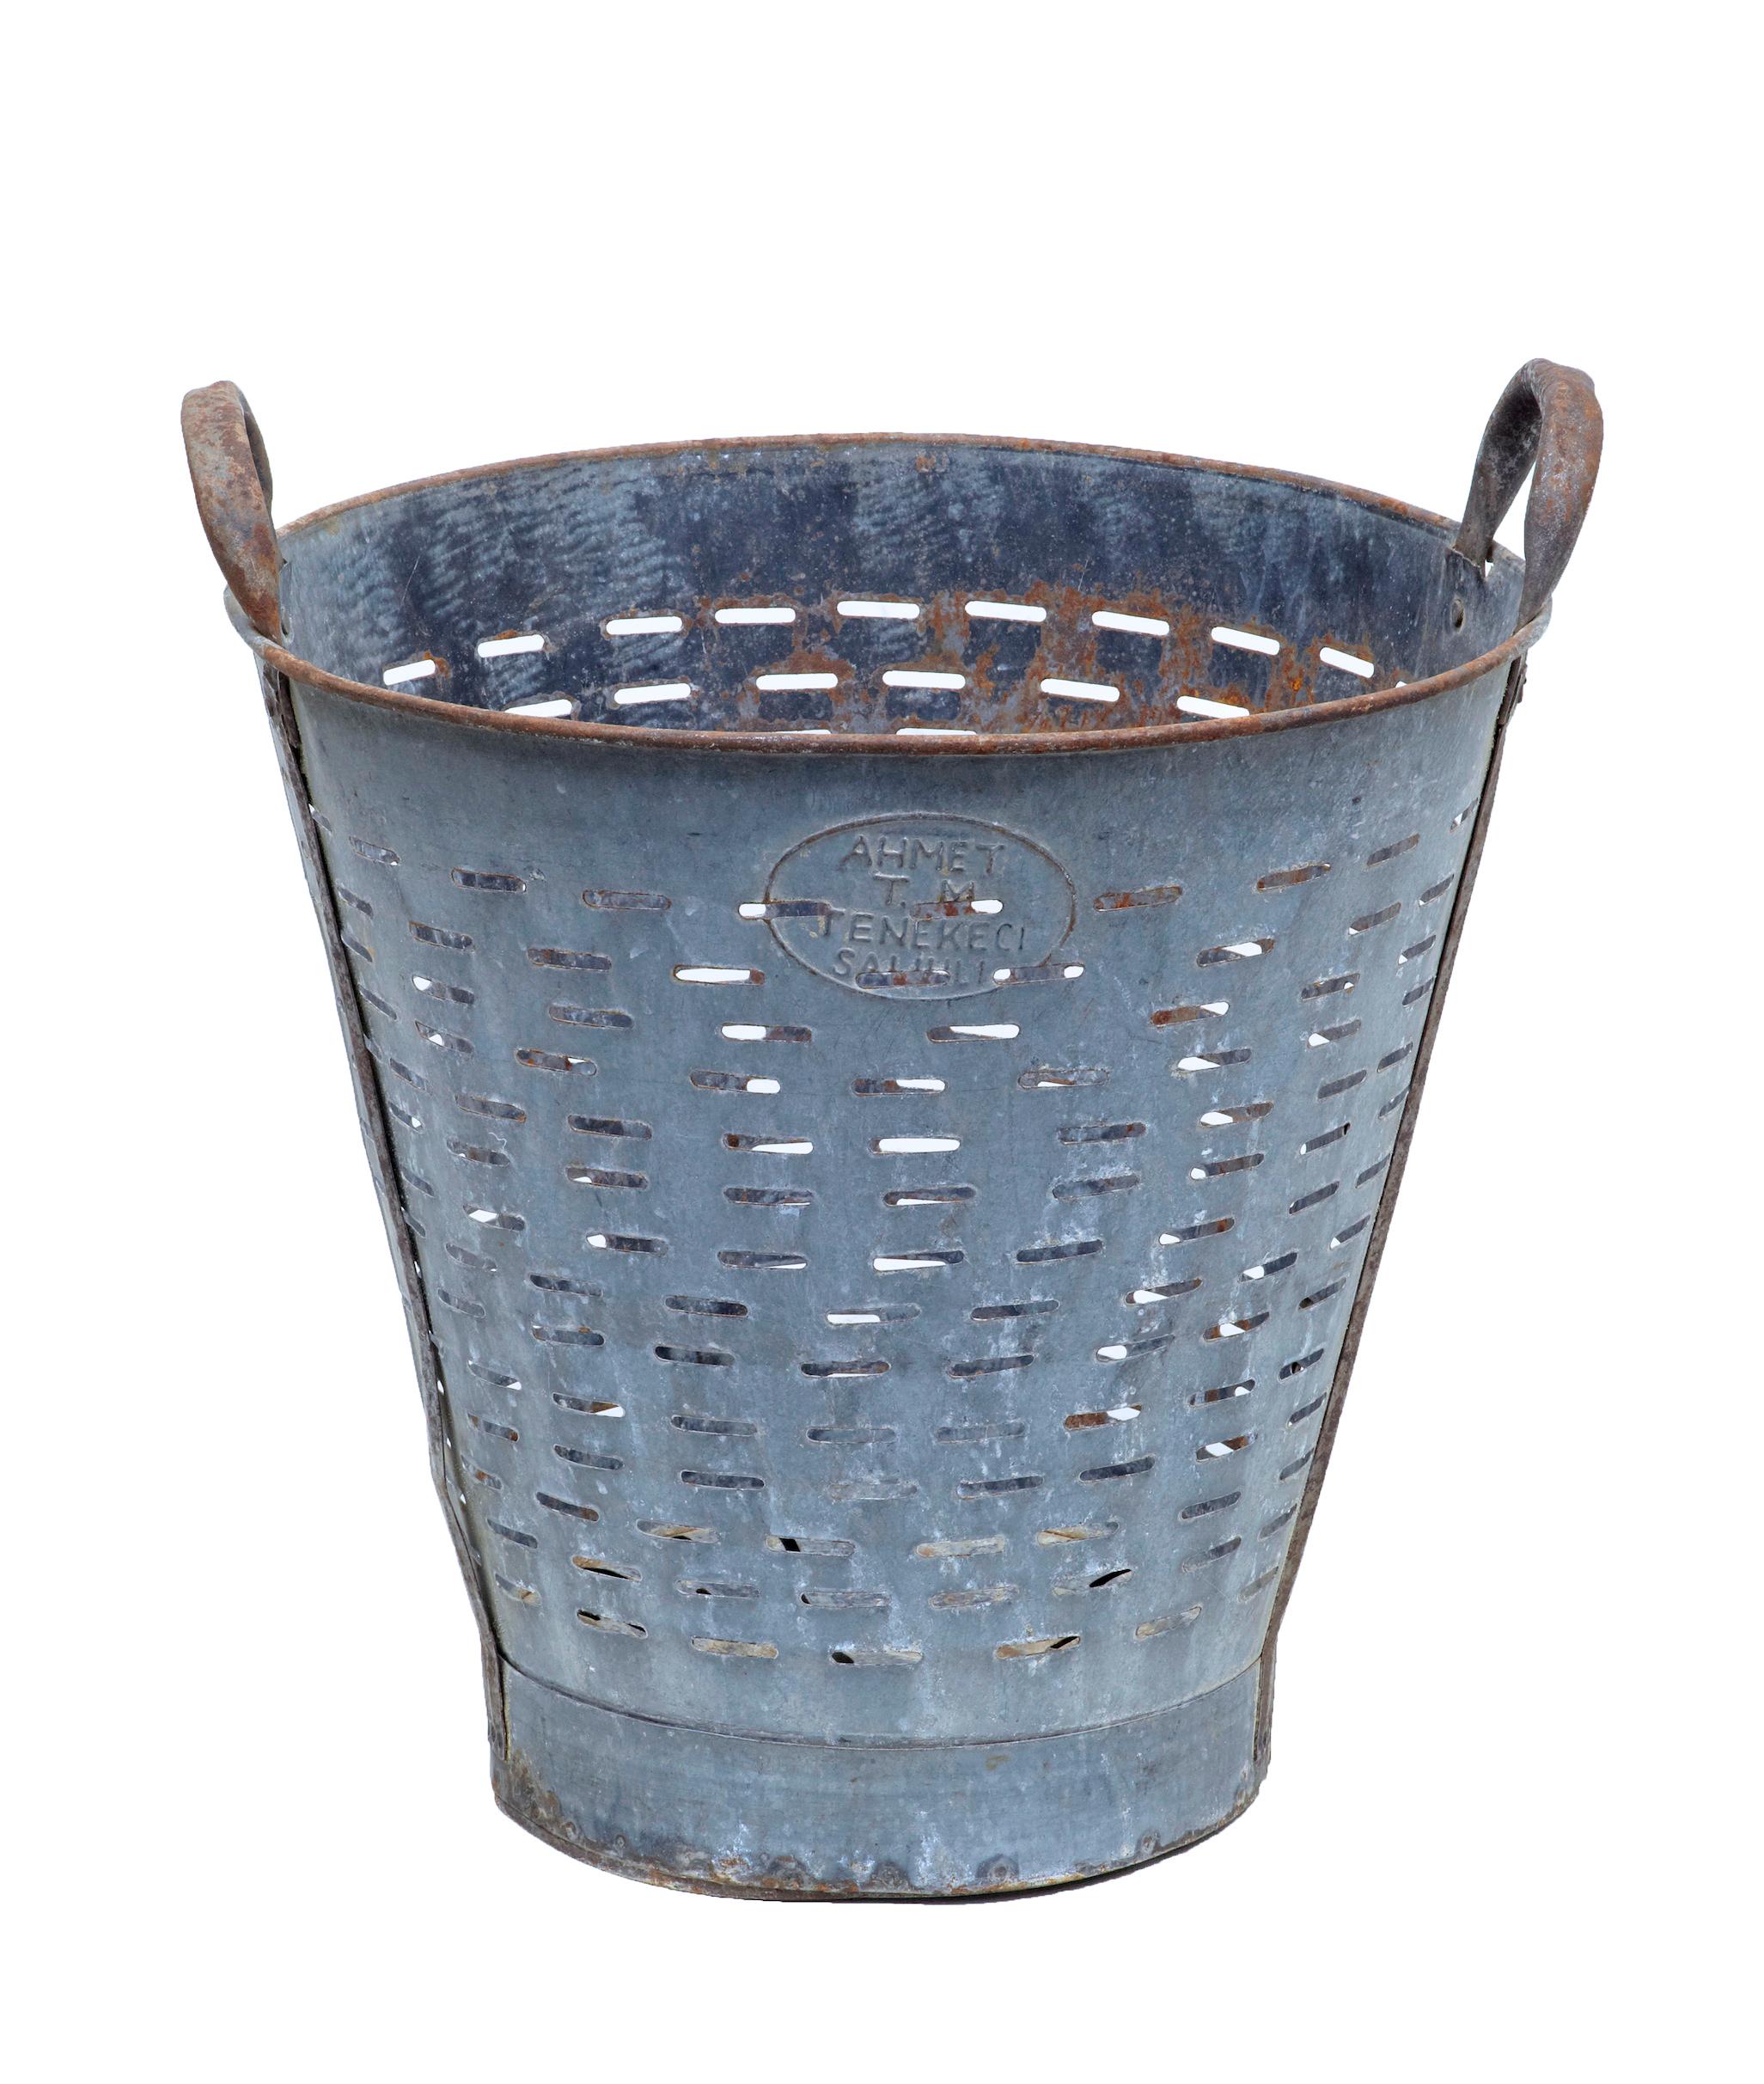 Early 20th century industrial metal basket, circa 1920.

Scandinavian fishing basket, with slotted sides and 2 carrying handles. Ideal for re-use as a waste paper basket or log bin.

Has taken on a desirable patina with mild rusting.